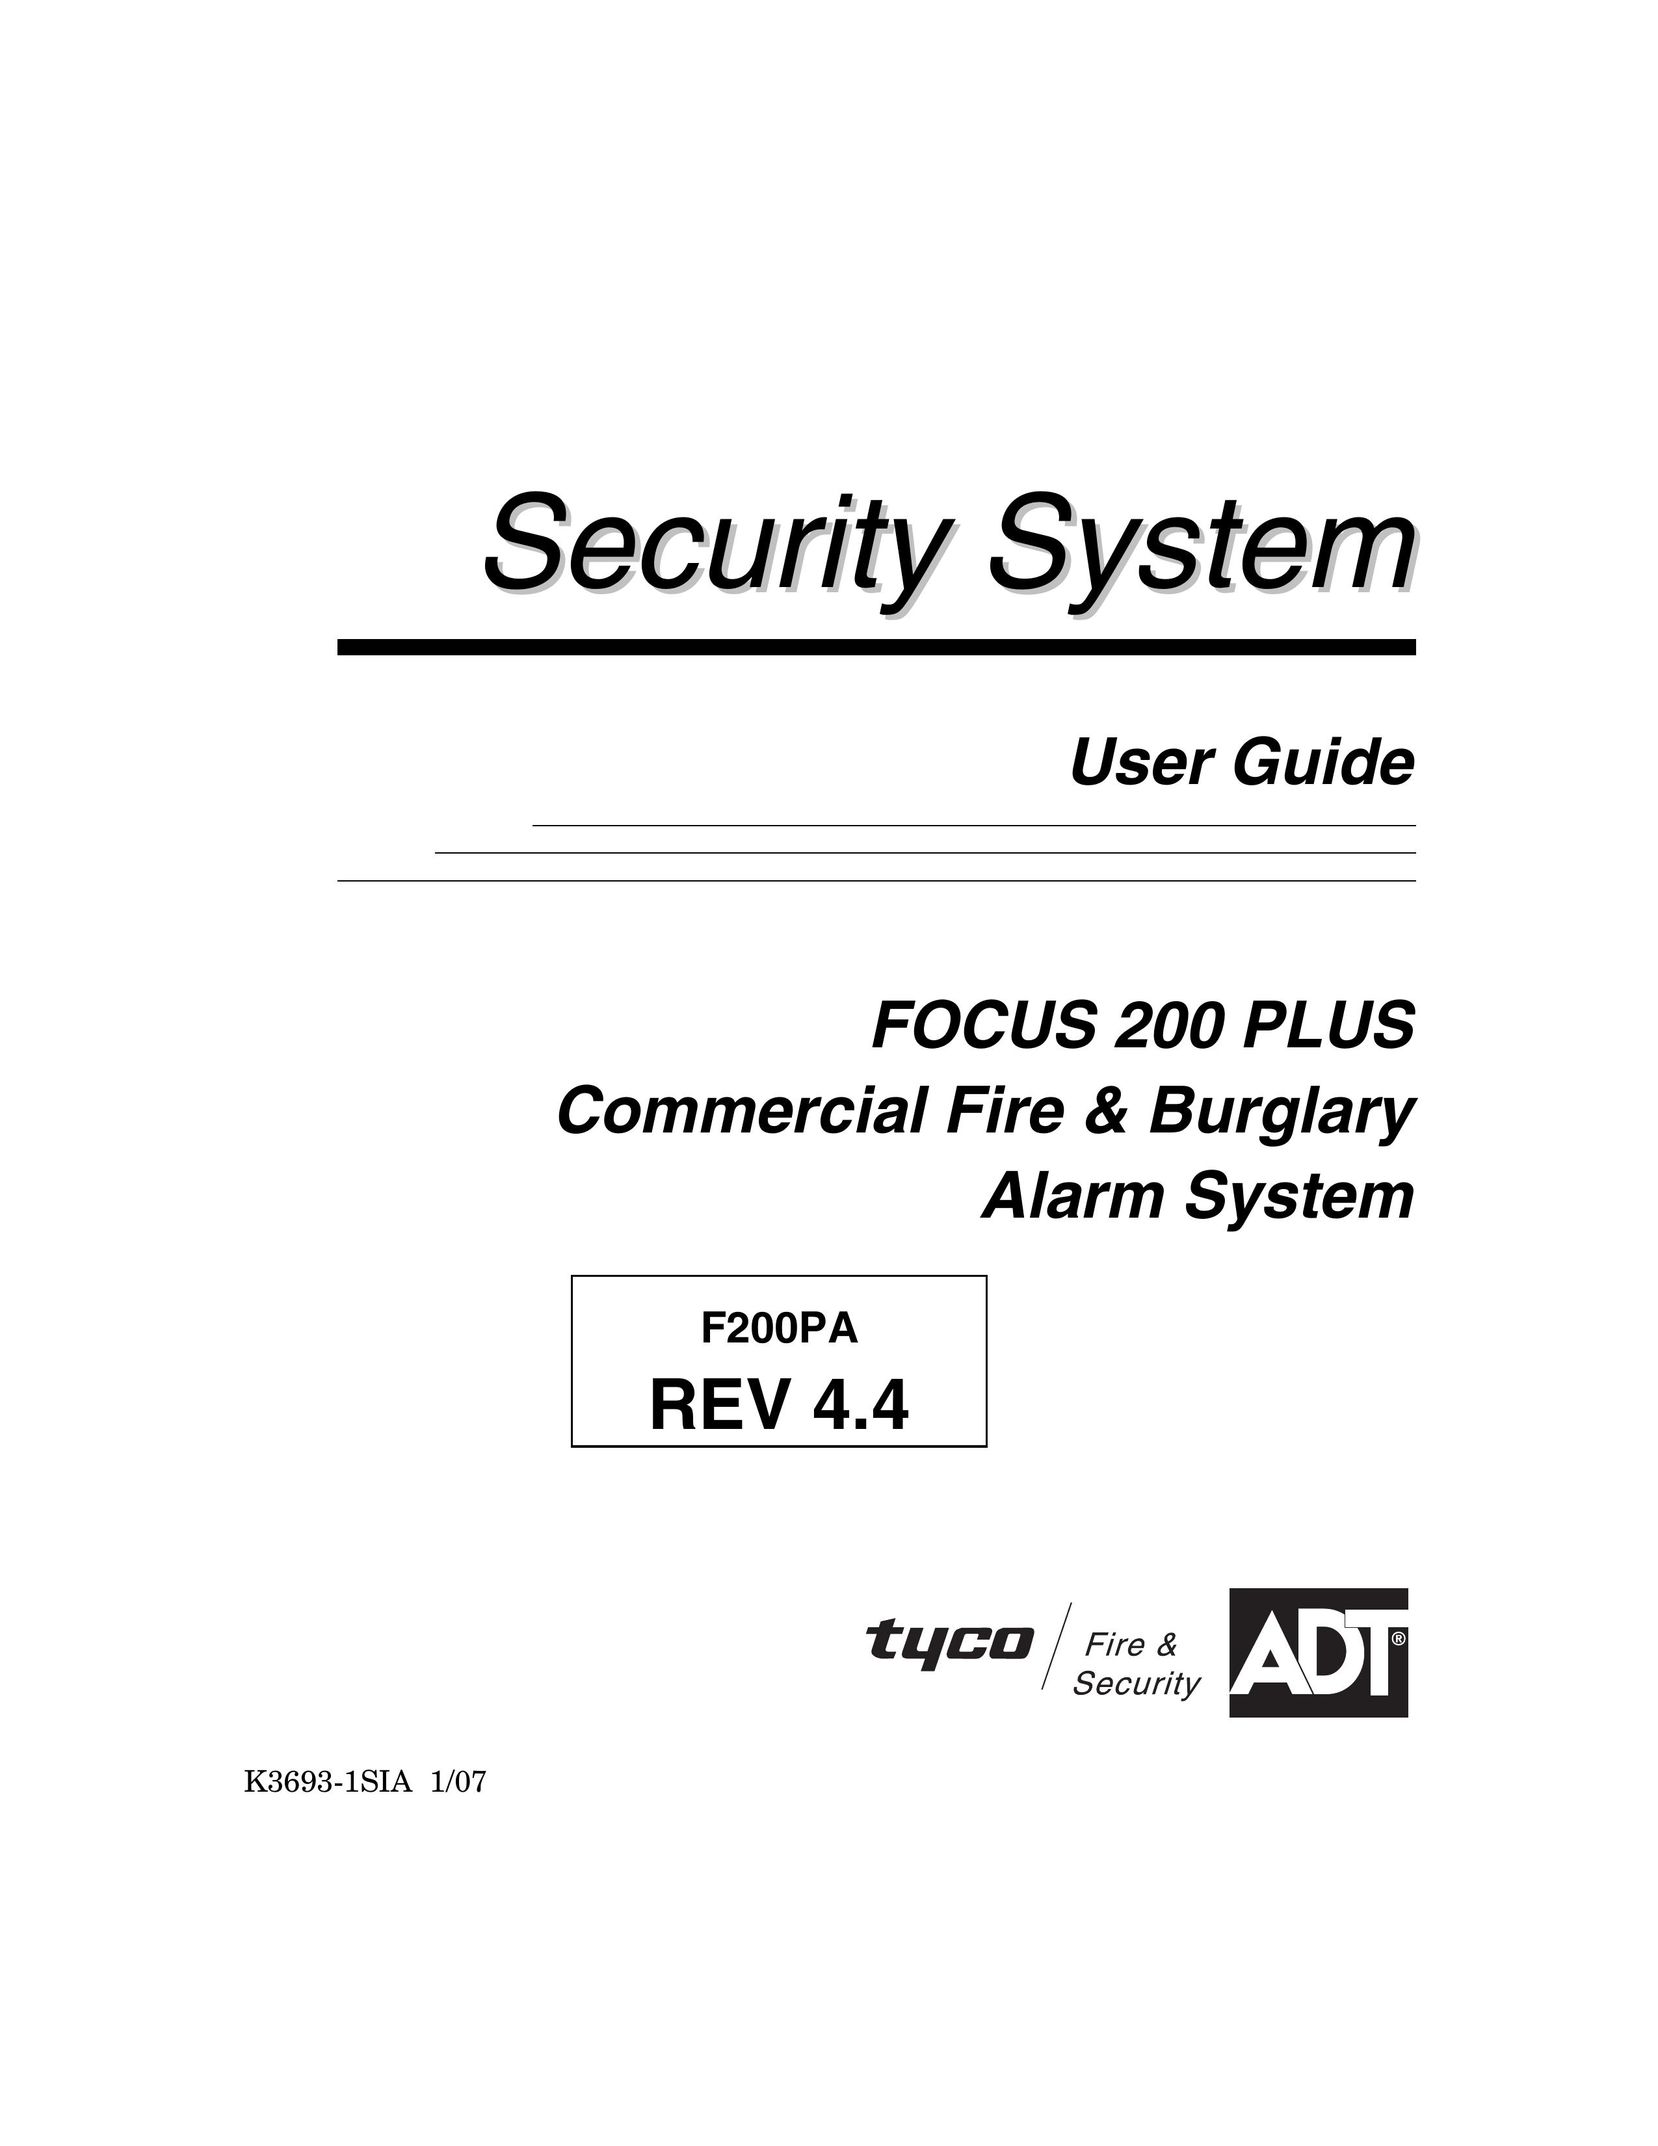 ADT Security Services 200 Plus Home Security System User Manual